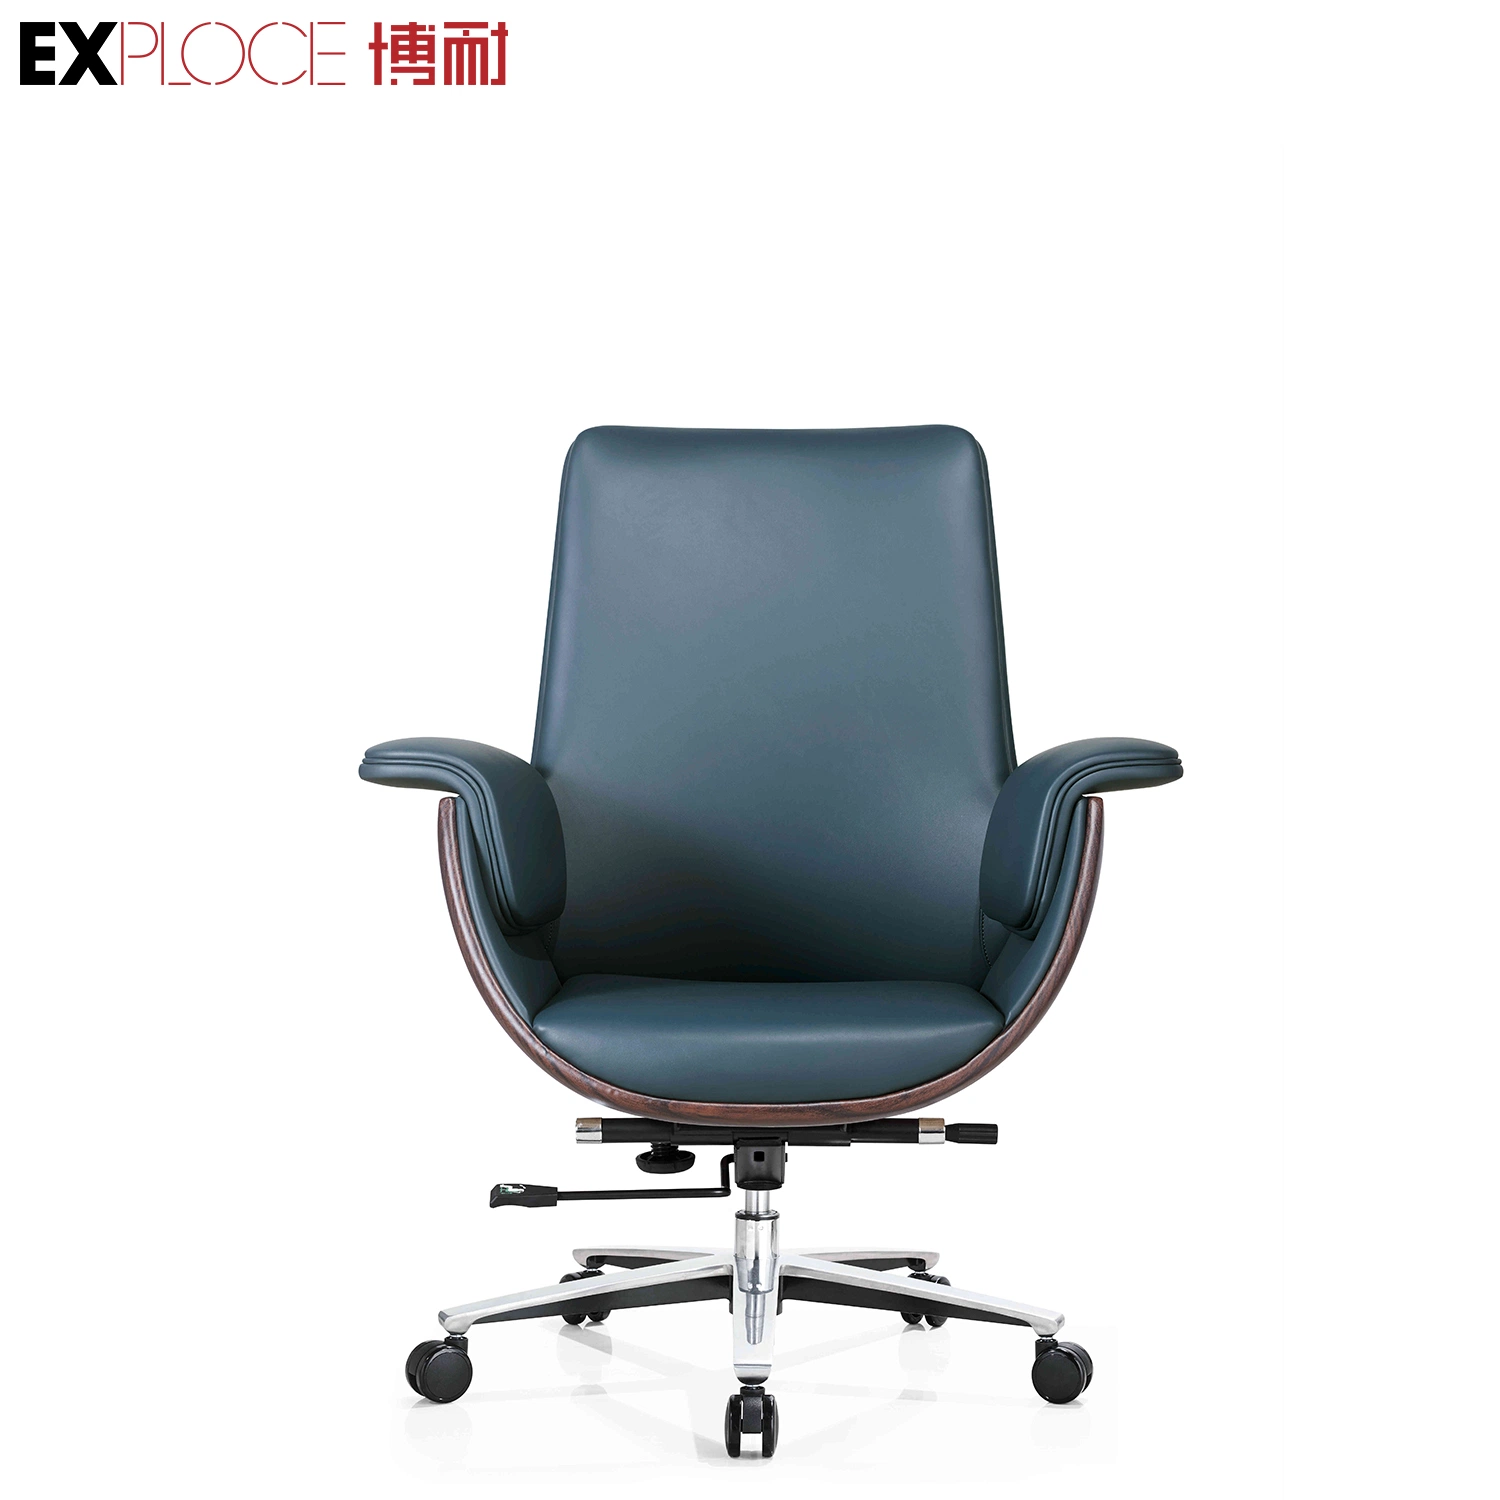 MID Back PU Leather Furniture Gaming Staff Office Computer Ergonomic Swivel Chairs with Synchronous Mechanism with Multiple Locking Positions